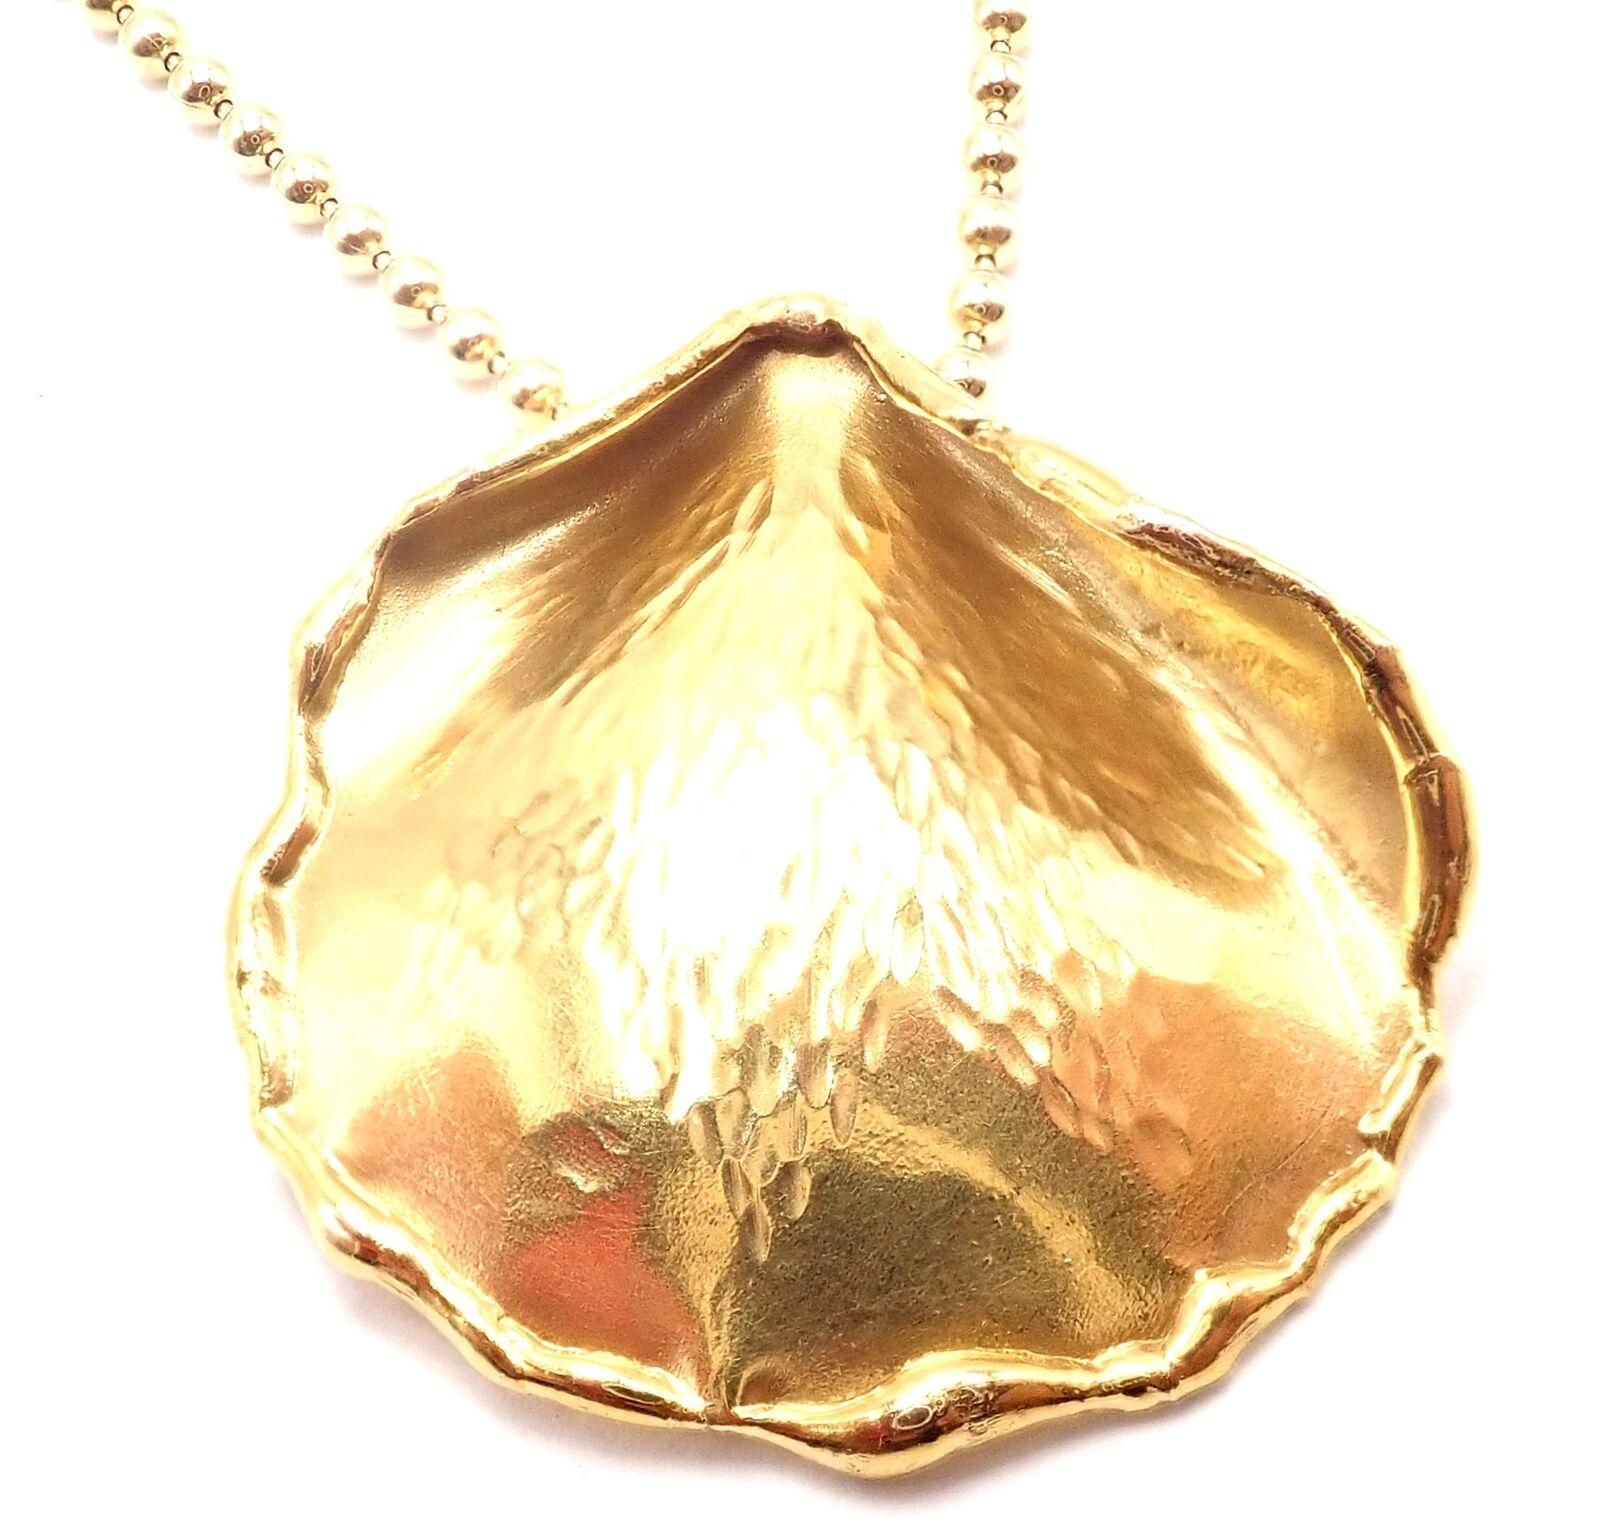 18k Yellow Gold Vintage Rose Petal Pendant Necklace by Angela Cummings for Tiffany & Co. 
Details: 
Necklace Length: 23 3/4